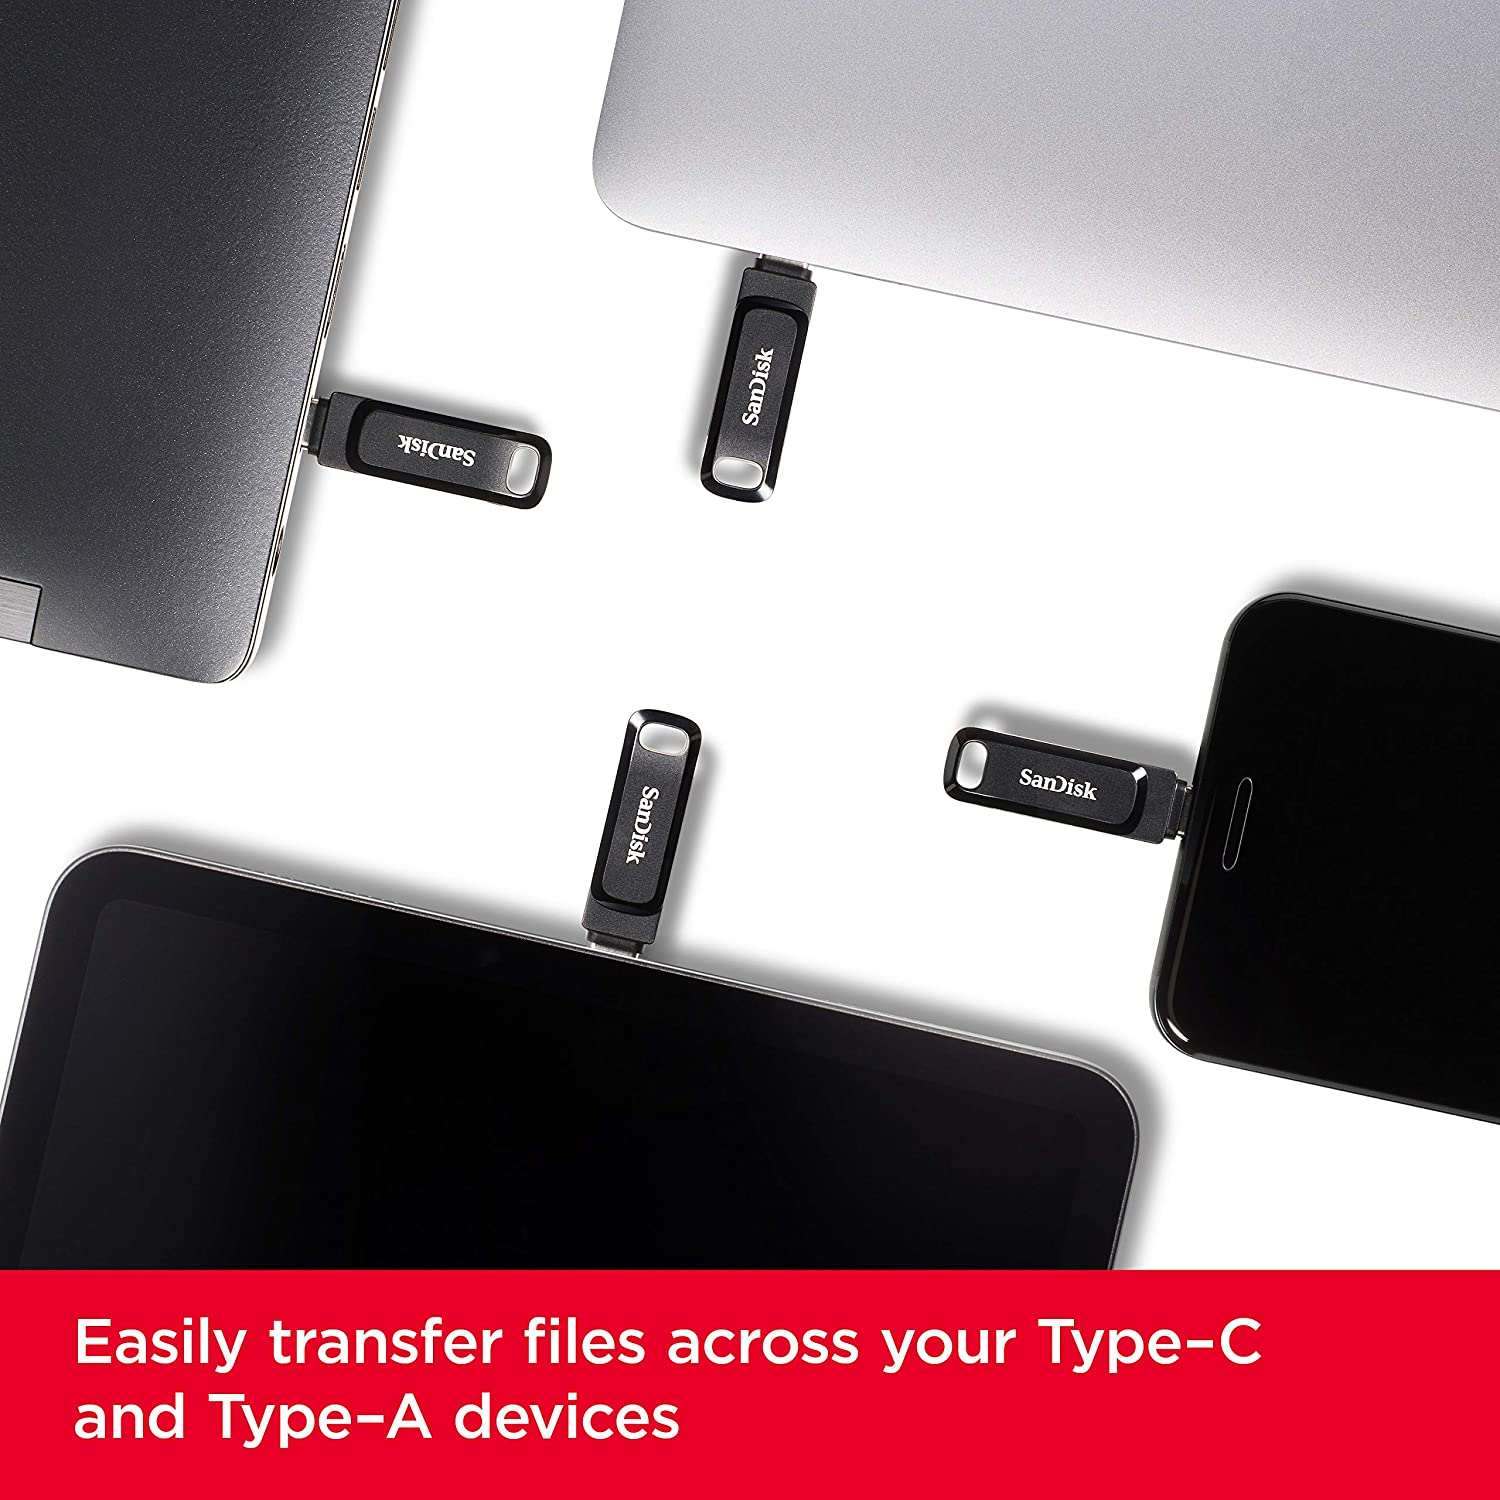  Easily transfer files across your type c and type a devices 